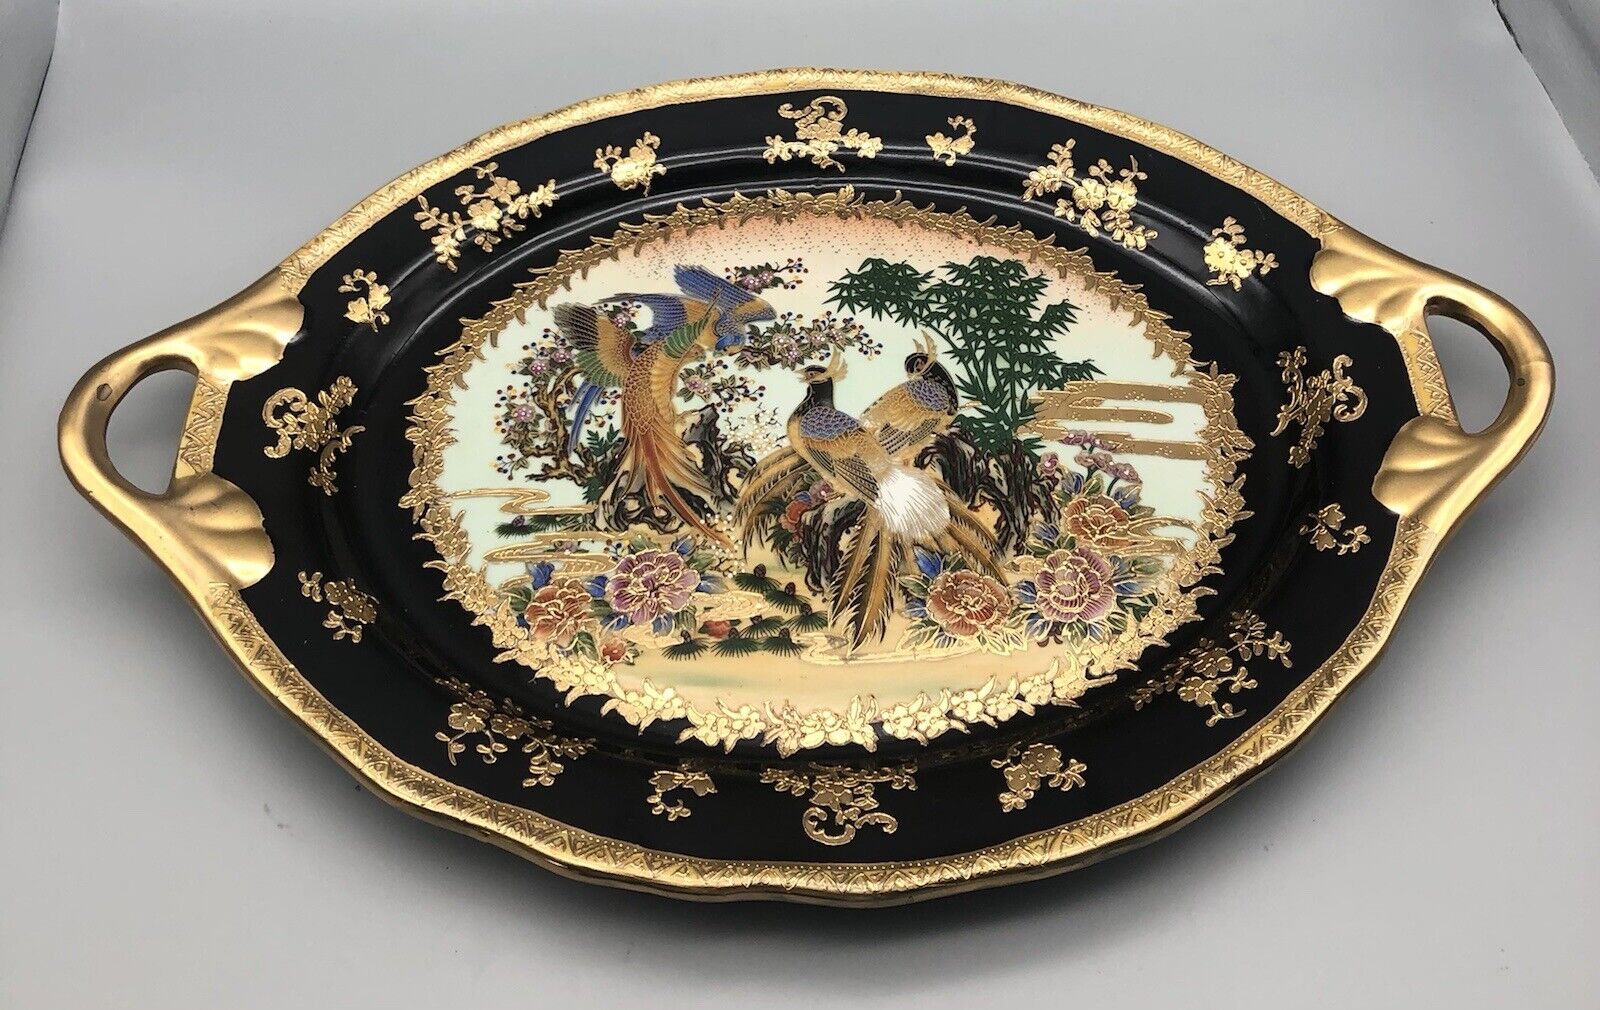 Black w/ 22k Gold trim Lacquer oriental Peacock Large platter Signed-Stamp 76 14